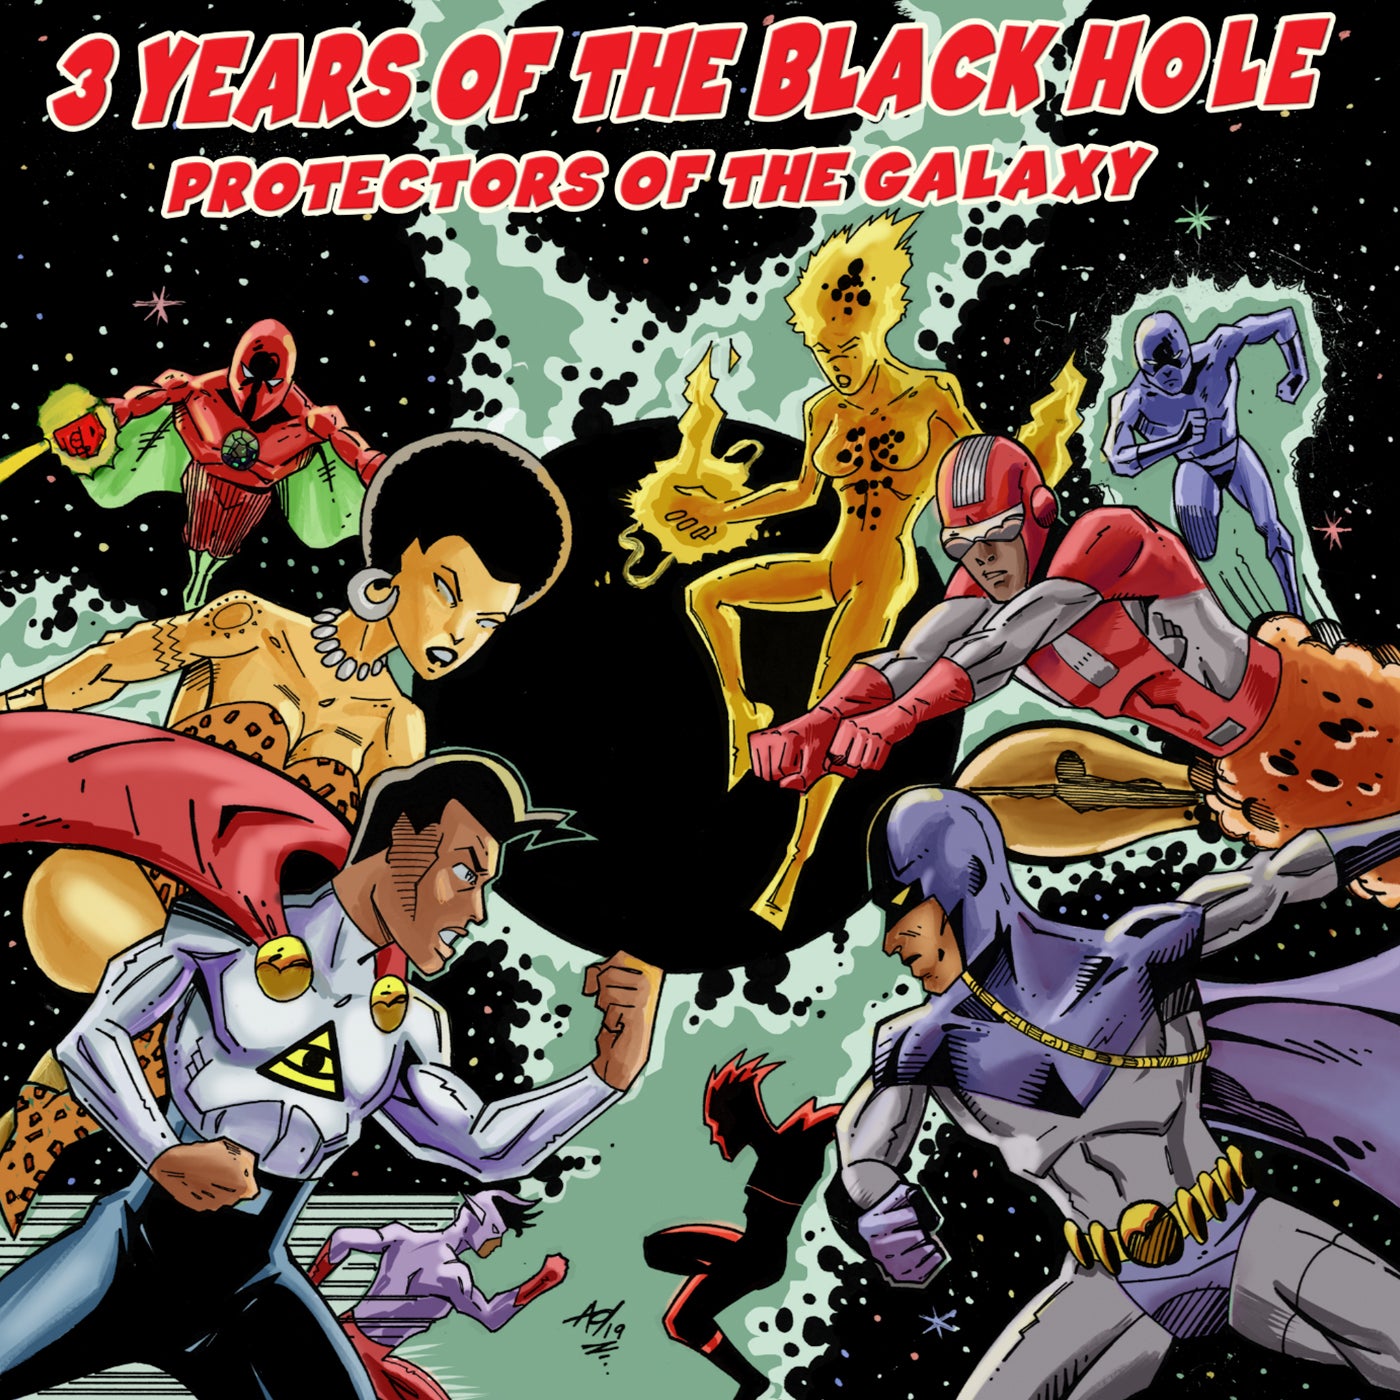 3 Years of The Black Hole: Protectors of the Galaxy